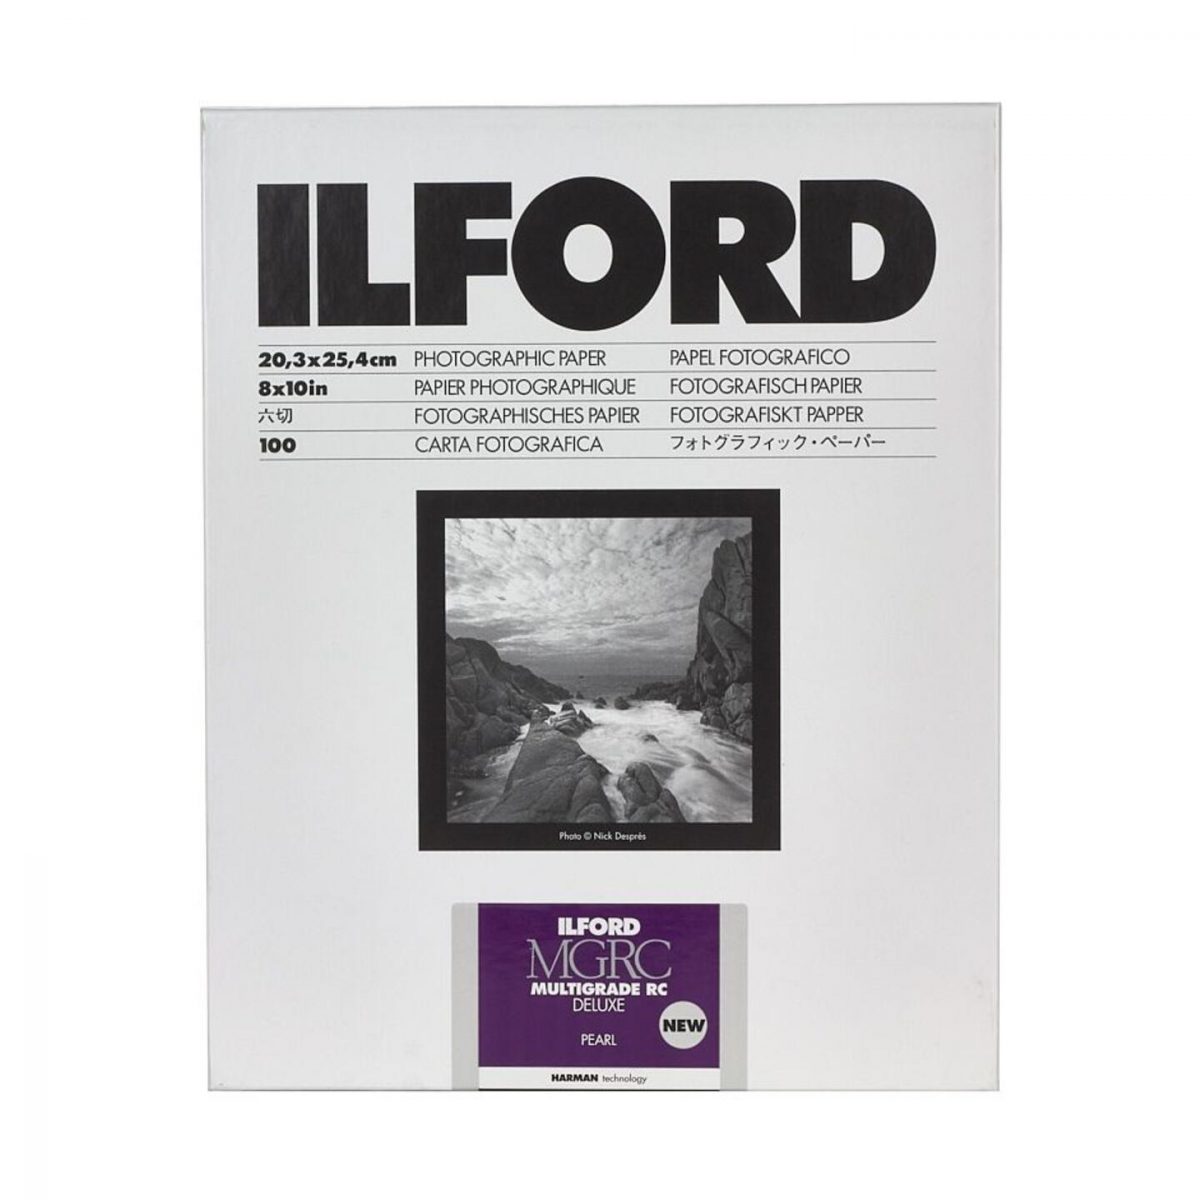 ilford_mg_rc_deluxe_pearl_01